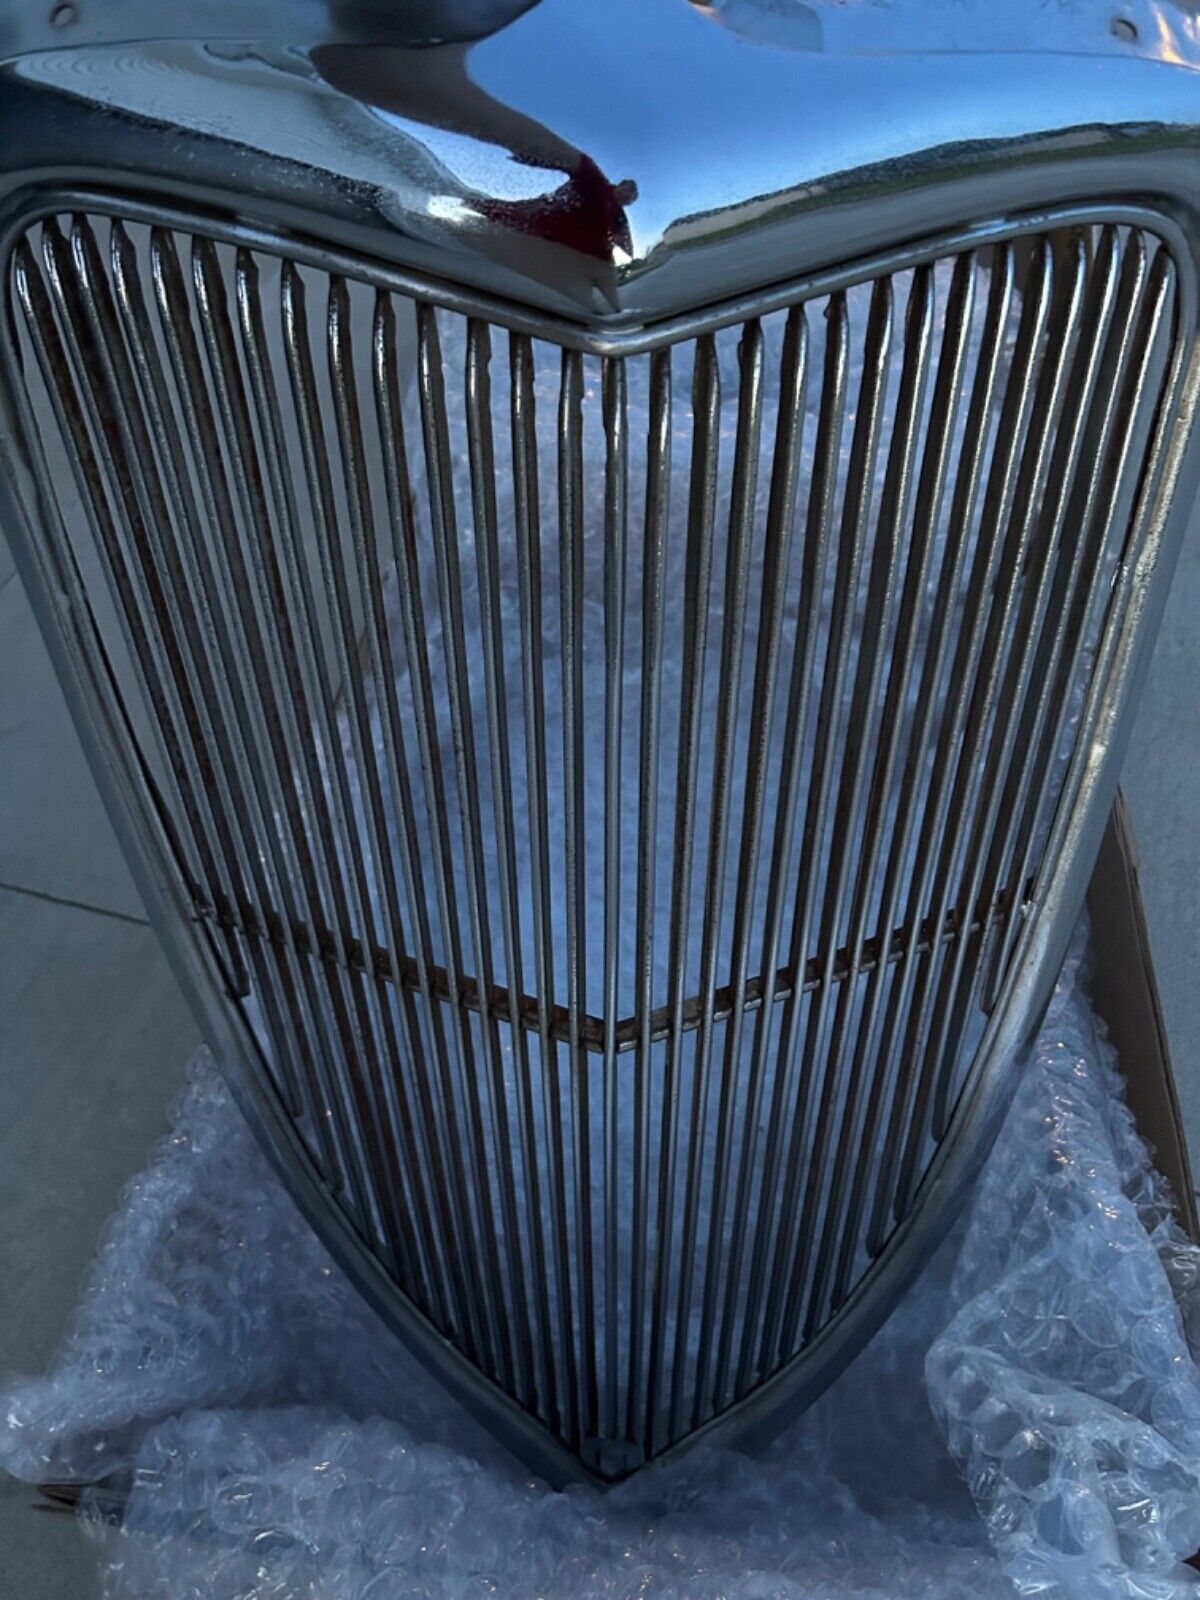 1934 Ford Grill